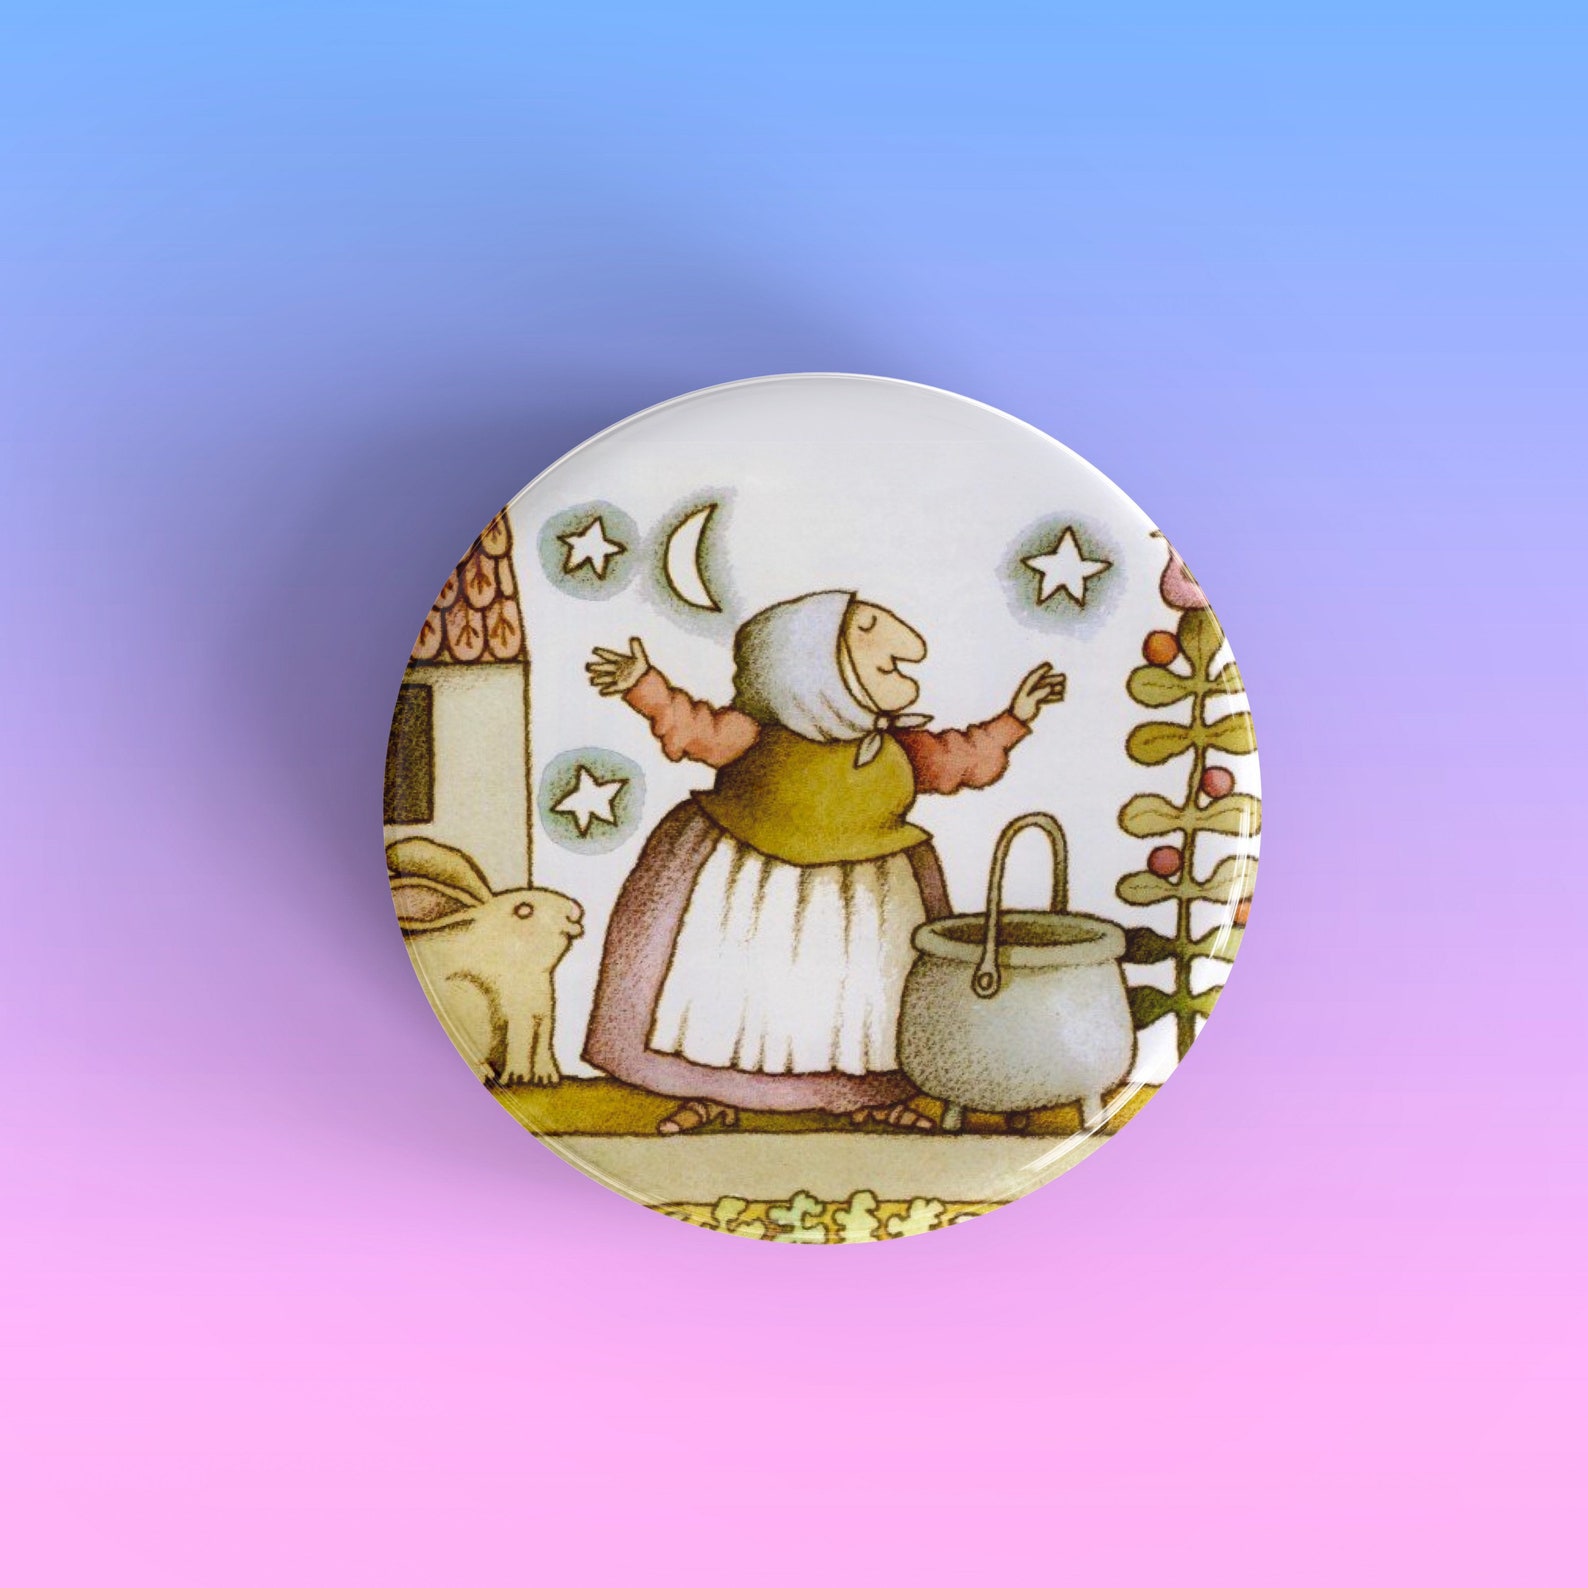 An image of Strega Nona on a pin. The image is from the book. The pin is on a purple ombre background. 